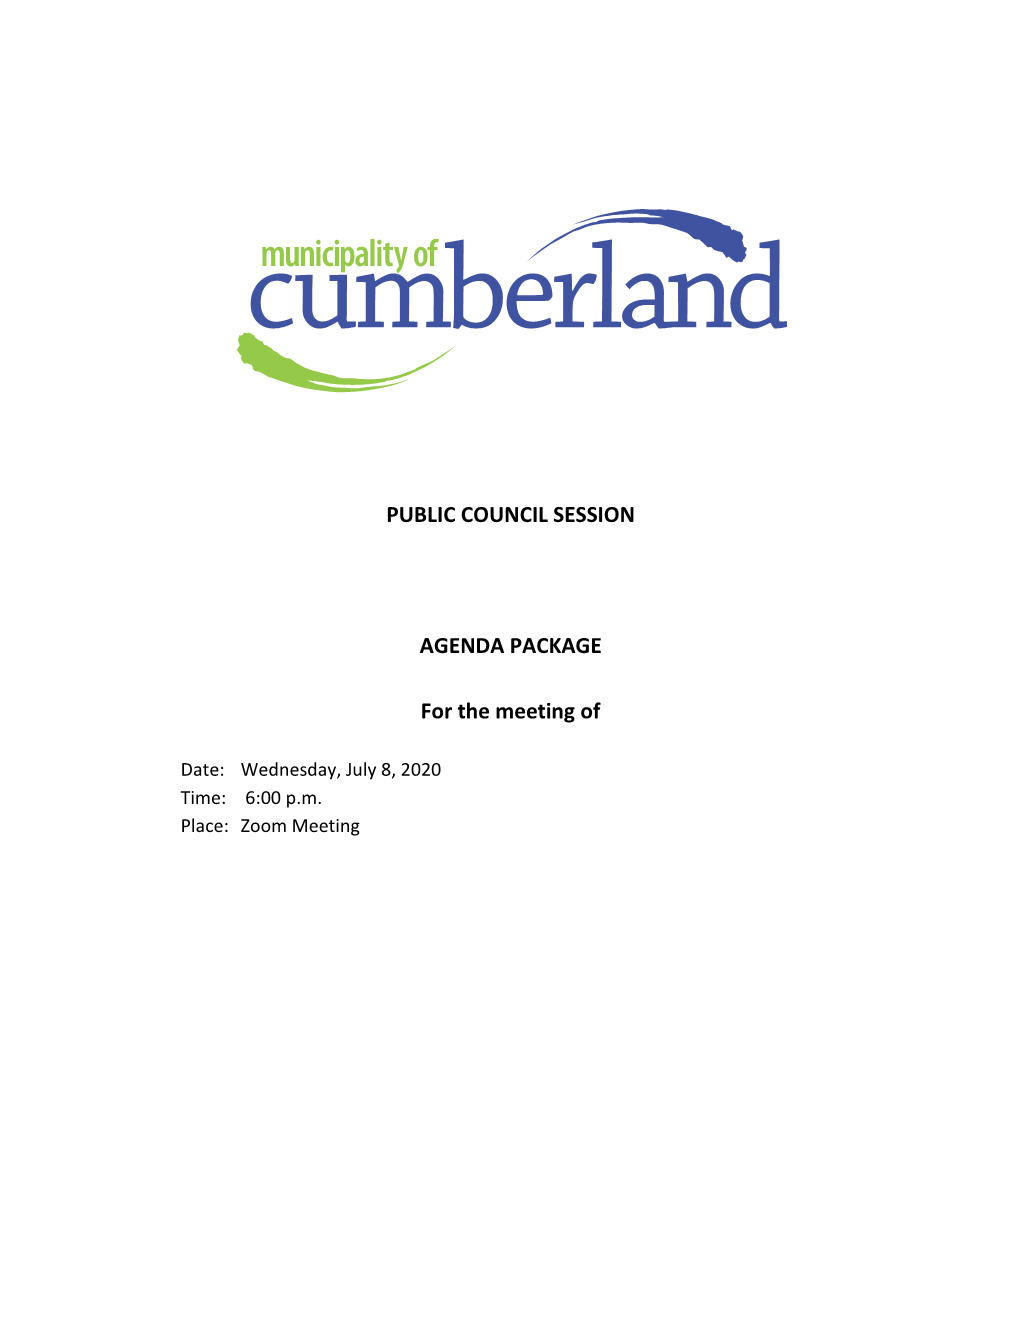 PUBLIC COUNCIL SESSION AGENDA PACKAGE for The